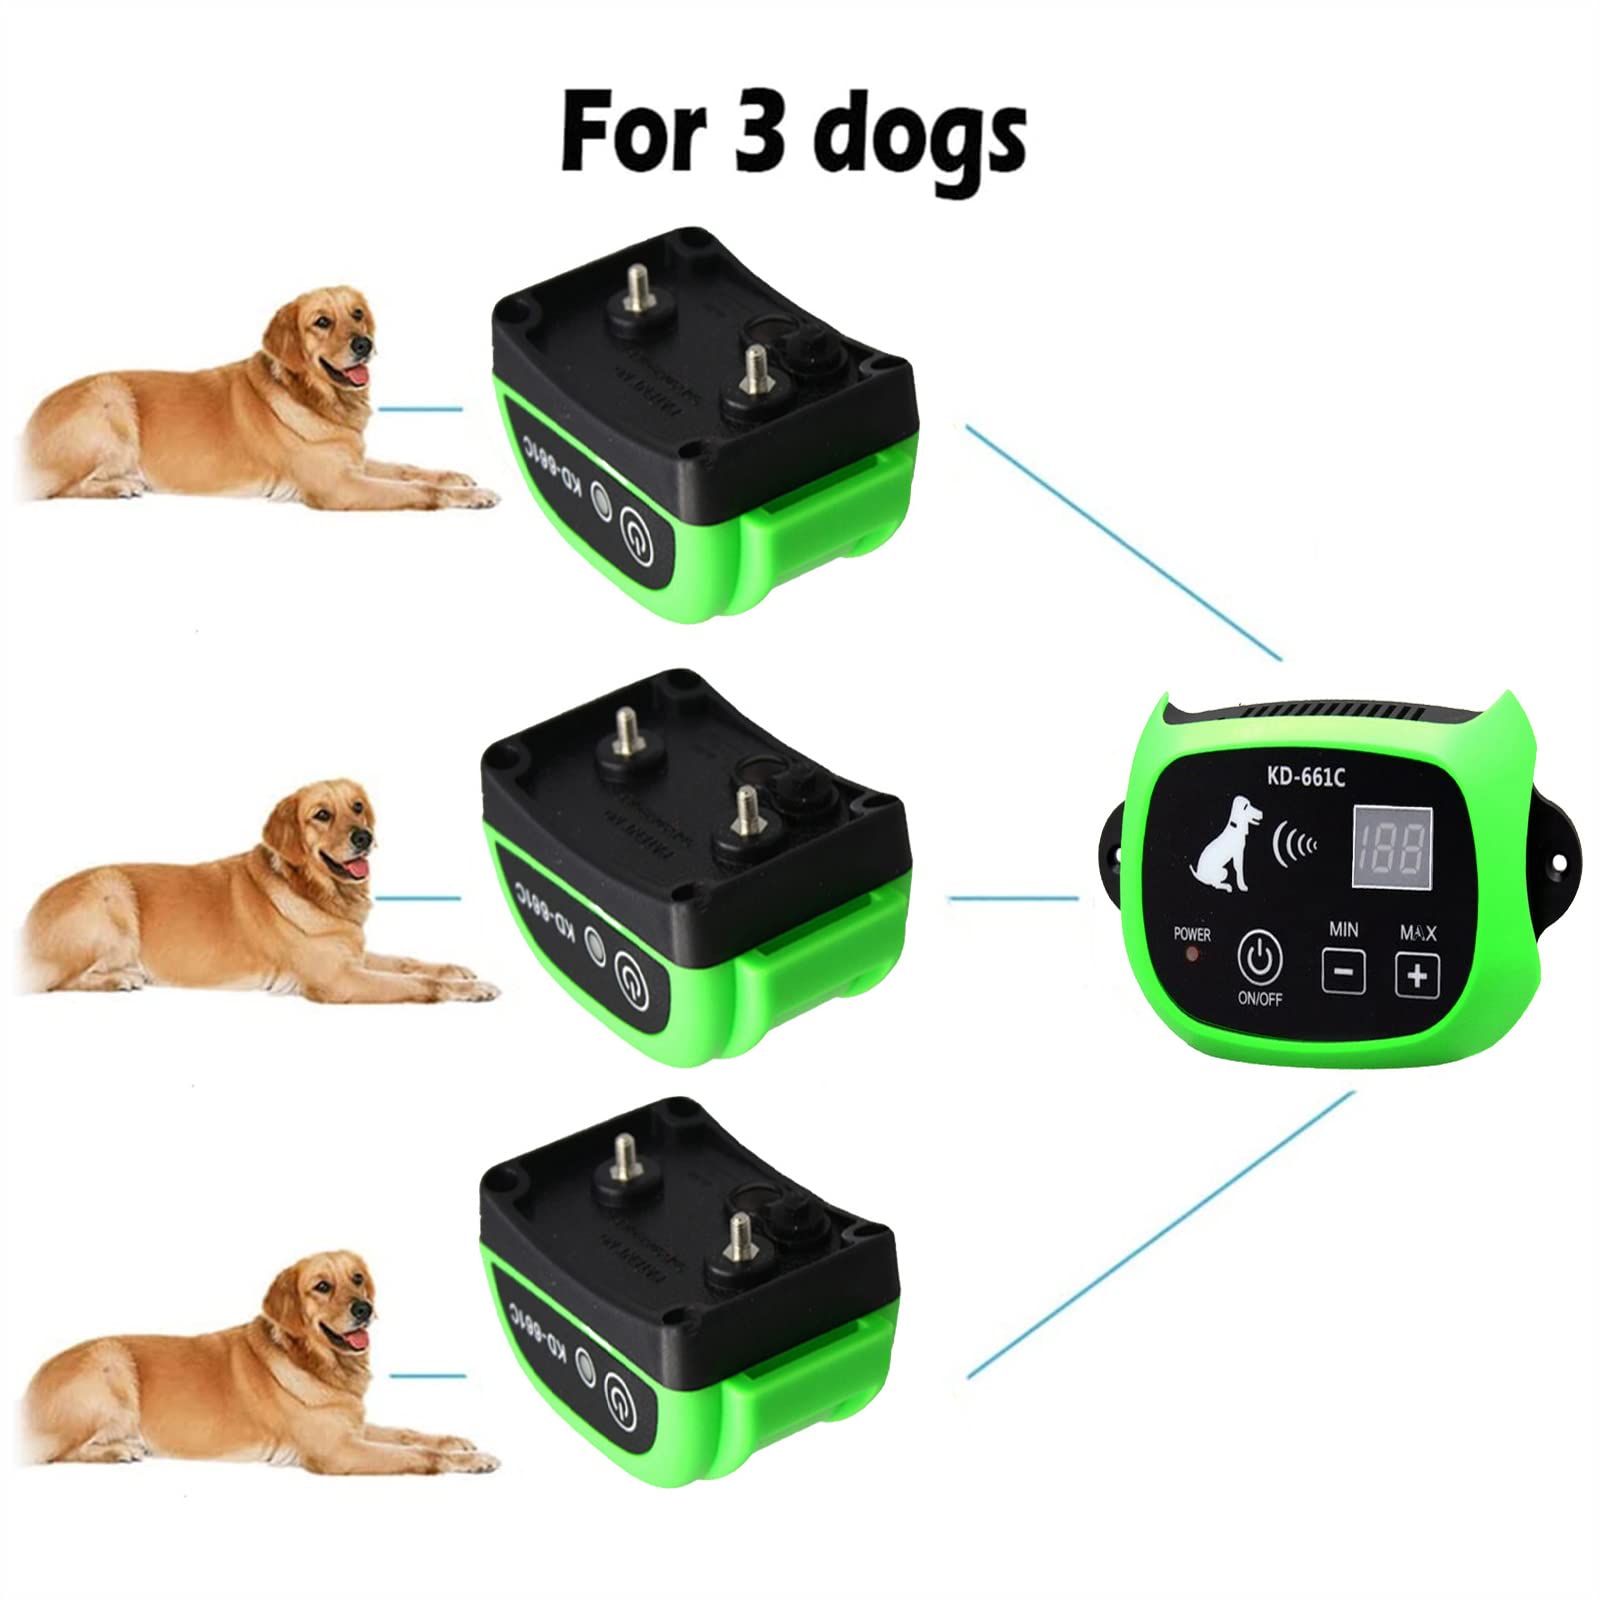 HEXIEDEN Electric Wireless Dog Fence,Pet Dog Container Boundary Containment System,with Waterproof and Rechargeable Collar Receiver,Adjustable Control Range,Harmless,for 1 2 3 Dogs,for2dogs